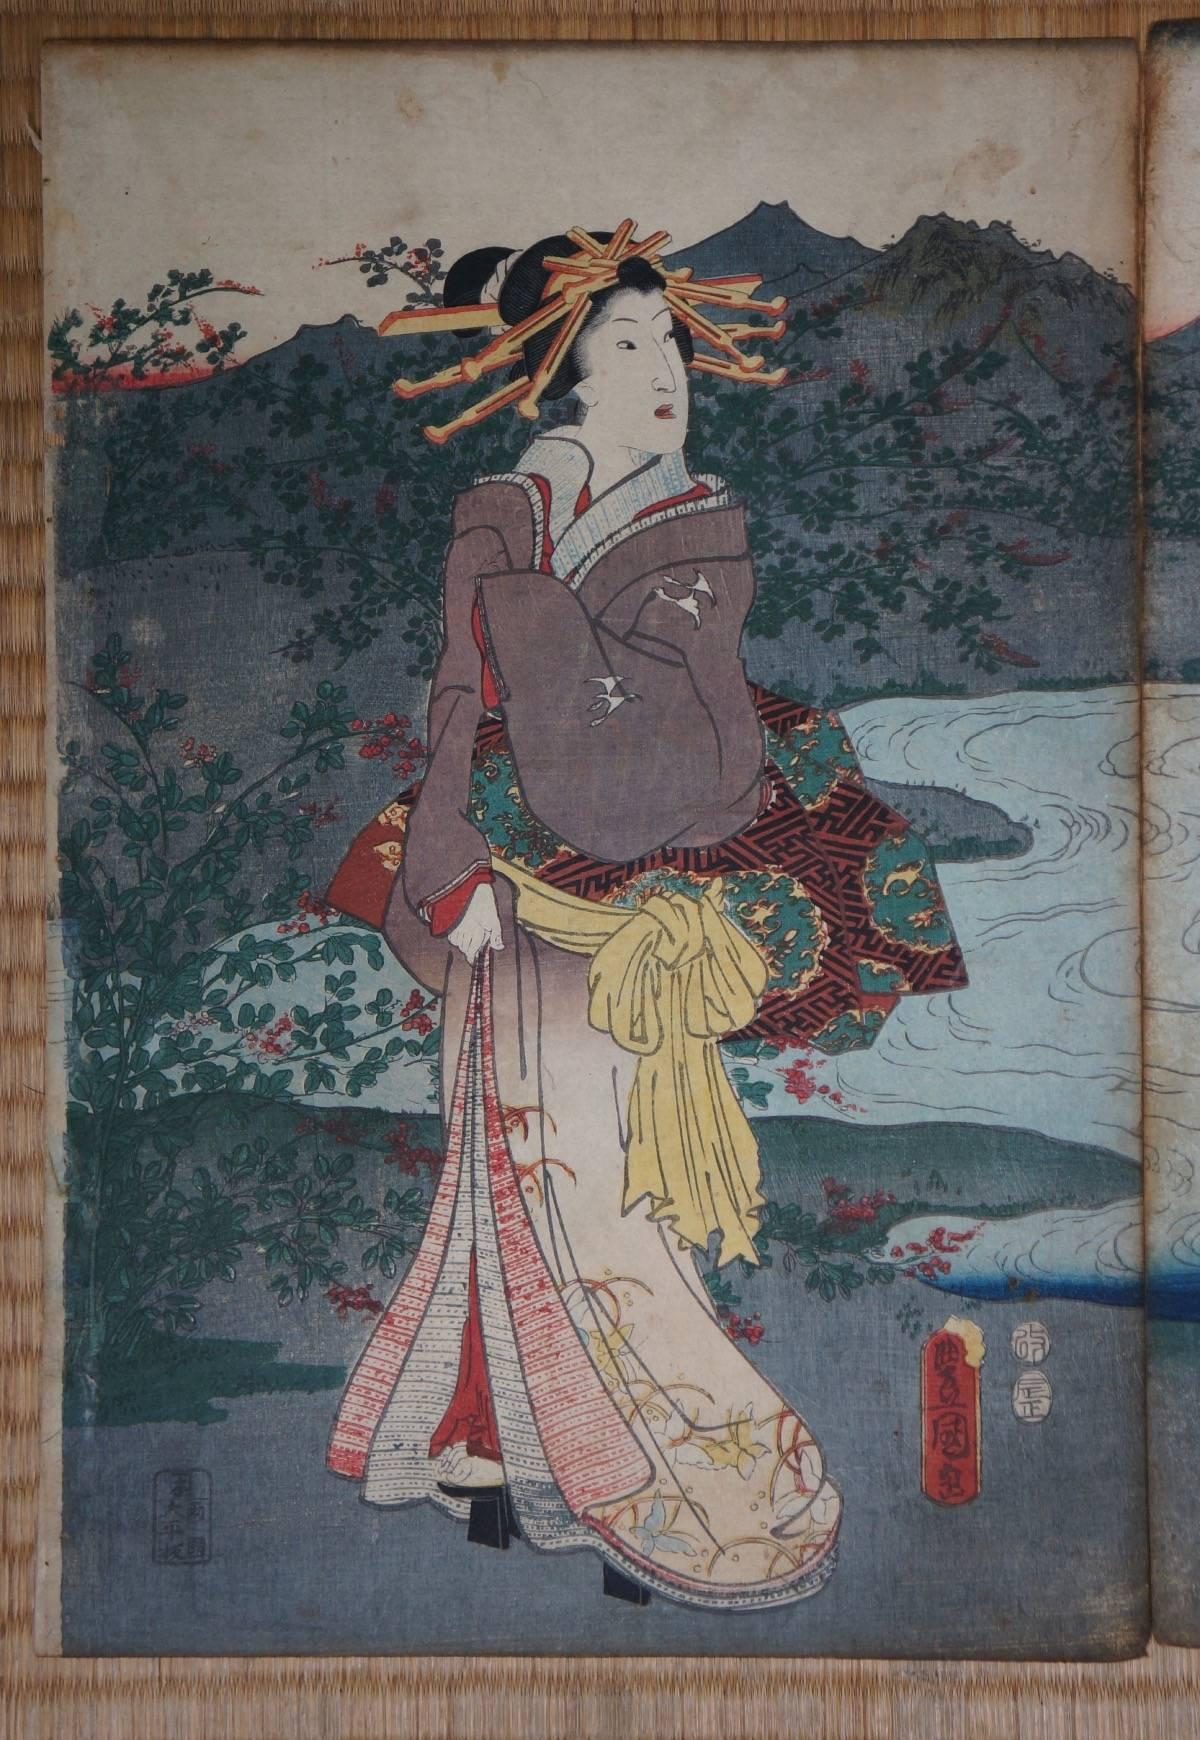 A collection or triptych of three attractive Japanese antique woodblock prints of beautifully dressed Bijins (beautiful person or women) dating to the 19th century. All signed by Utagawa Toyokuni.

They possess good vibrant color and are